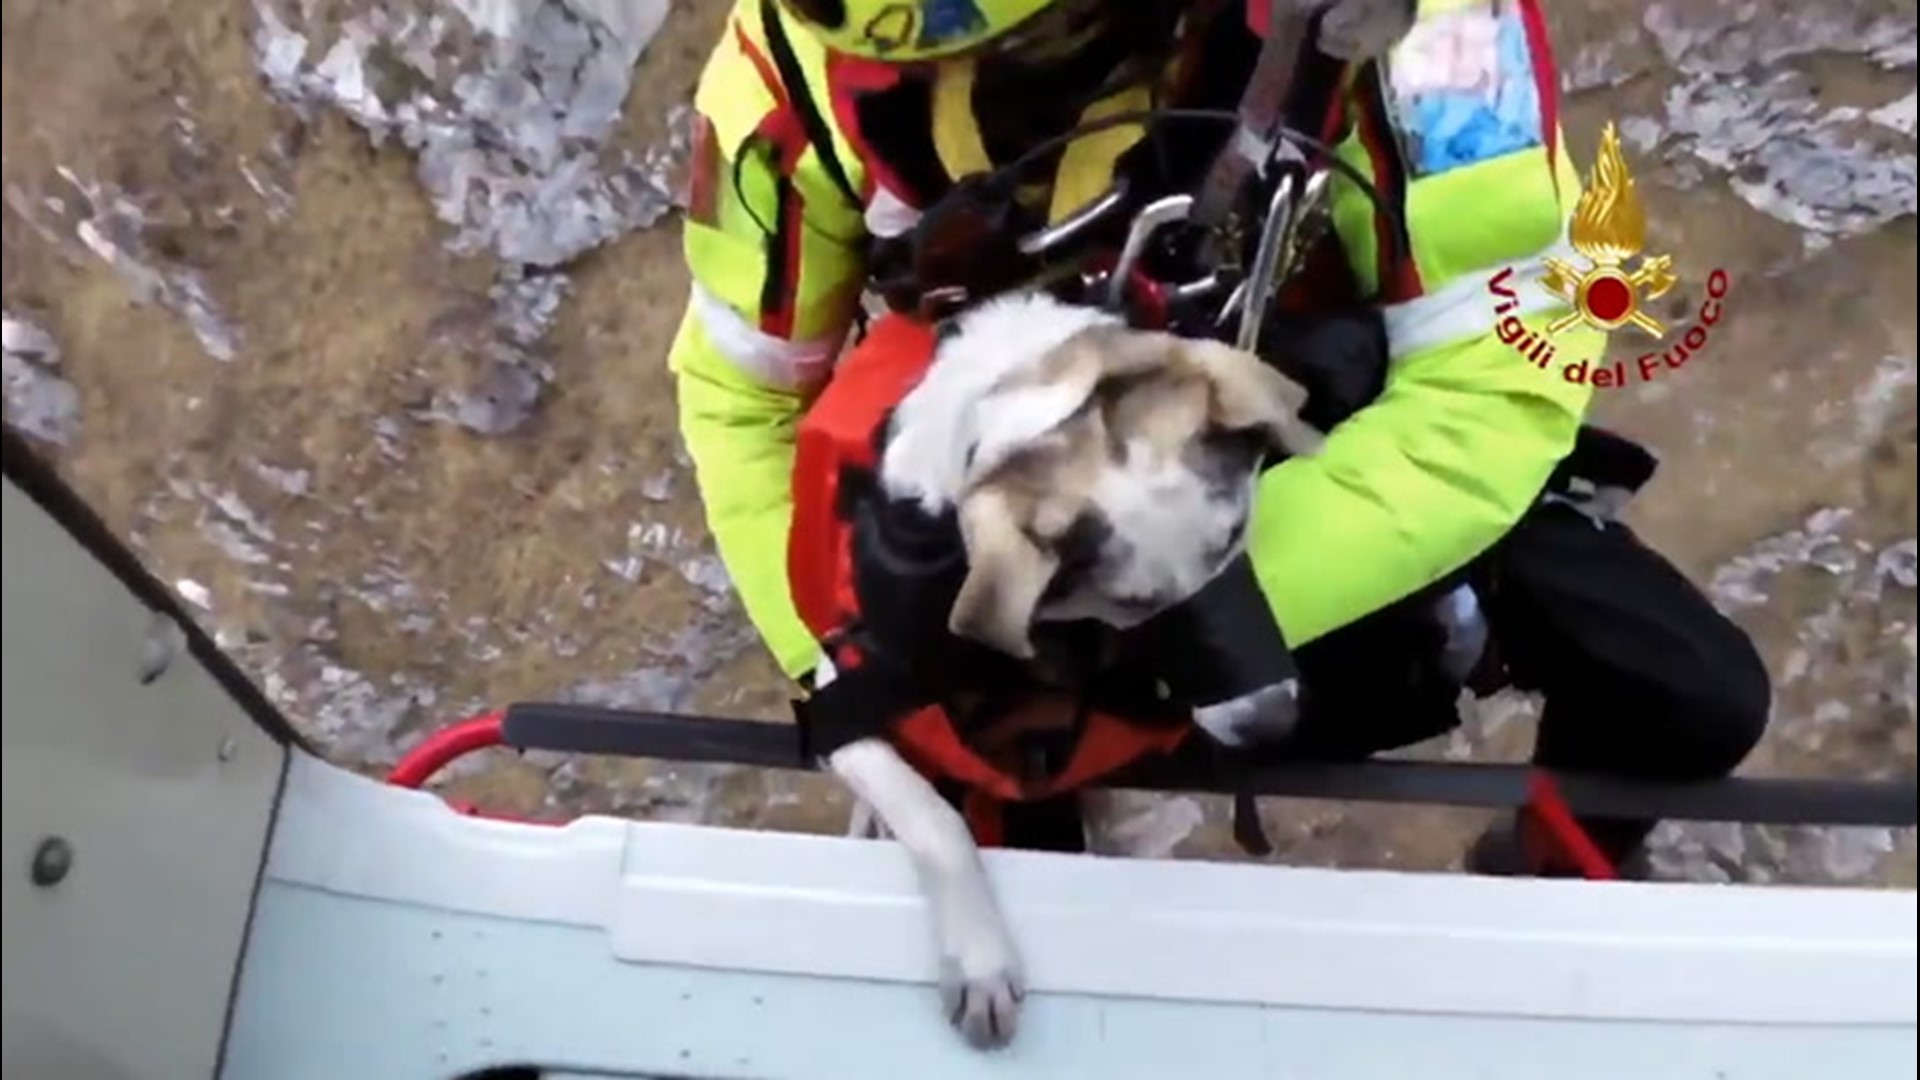 A woman and her dog had to be rescued by helicopter after they strayed from a hiking path on Moregallo, a mountain in the Italian province of Lecco, on Feb. 27.